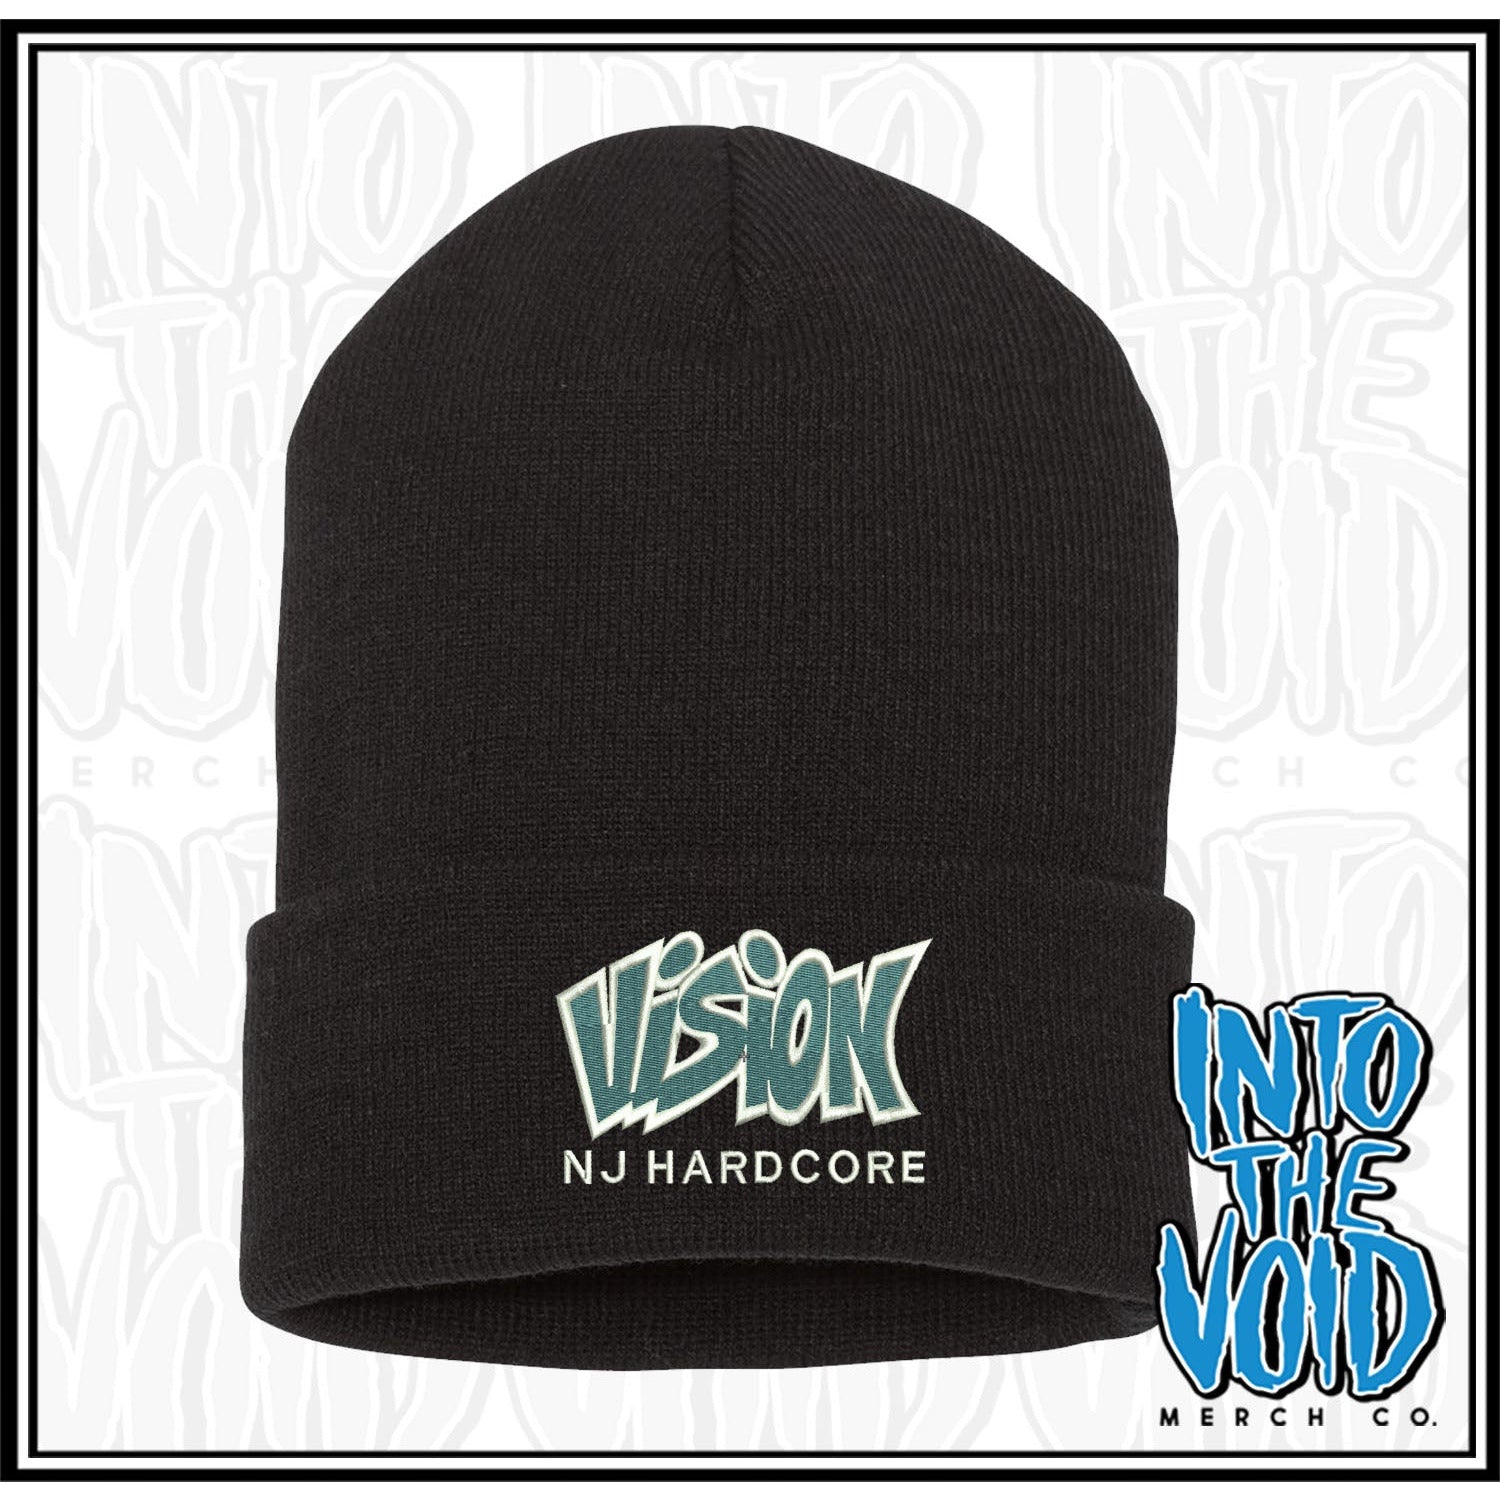 VISION - NJ HARDCORE - EMBROIDERED CUFFED BEANIE - INTO THE VOID Merch Co.